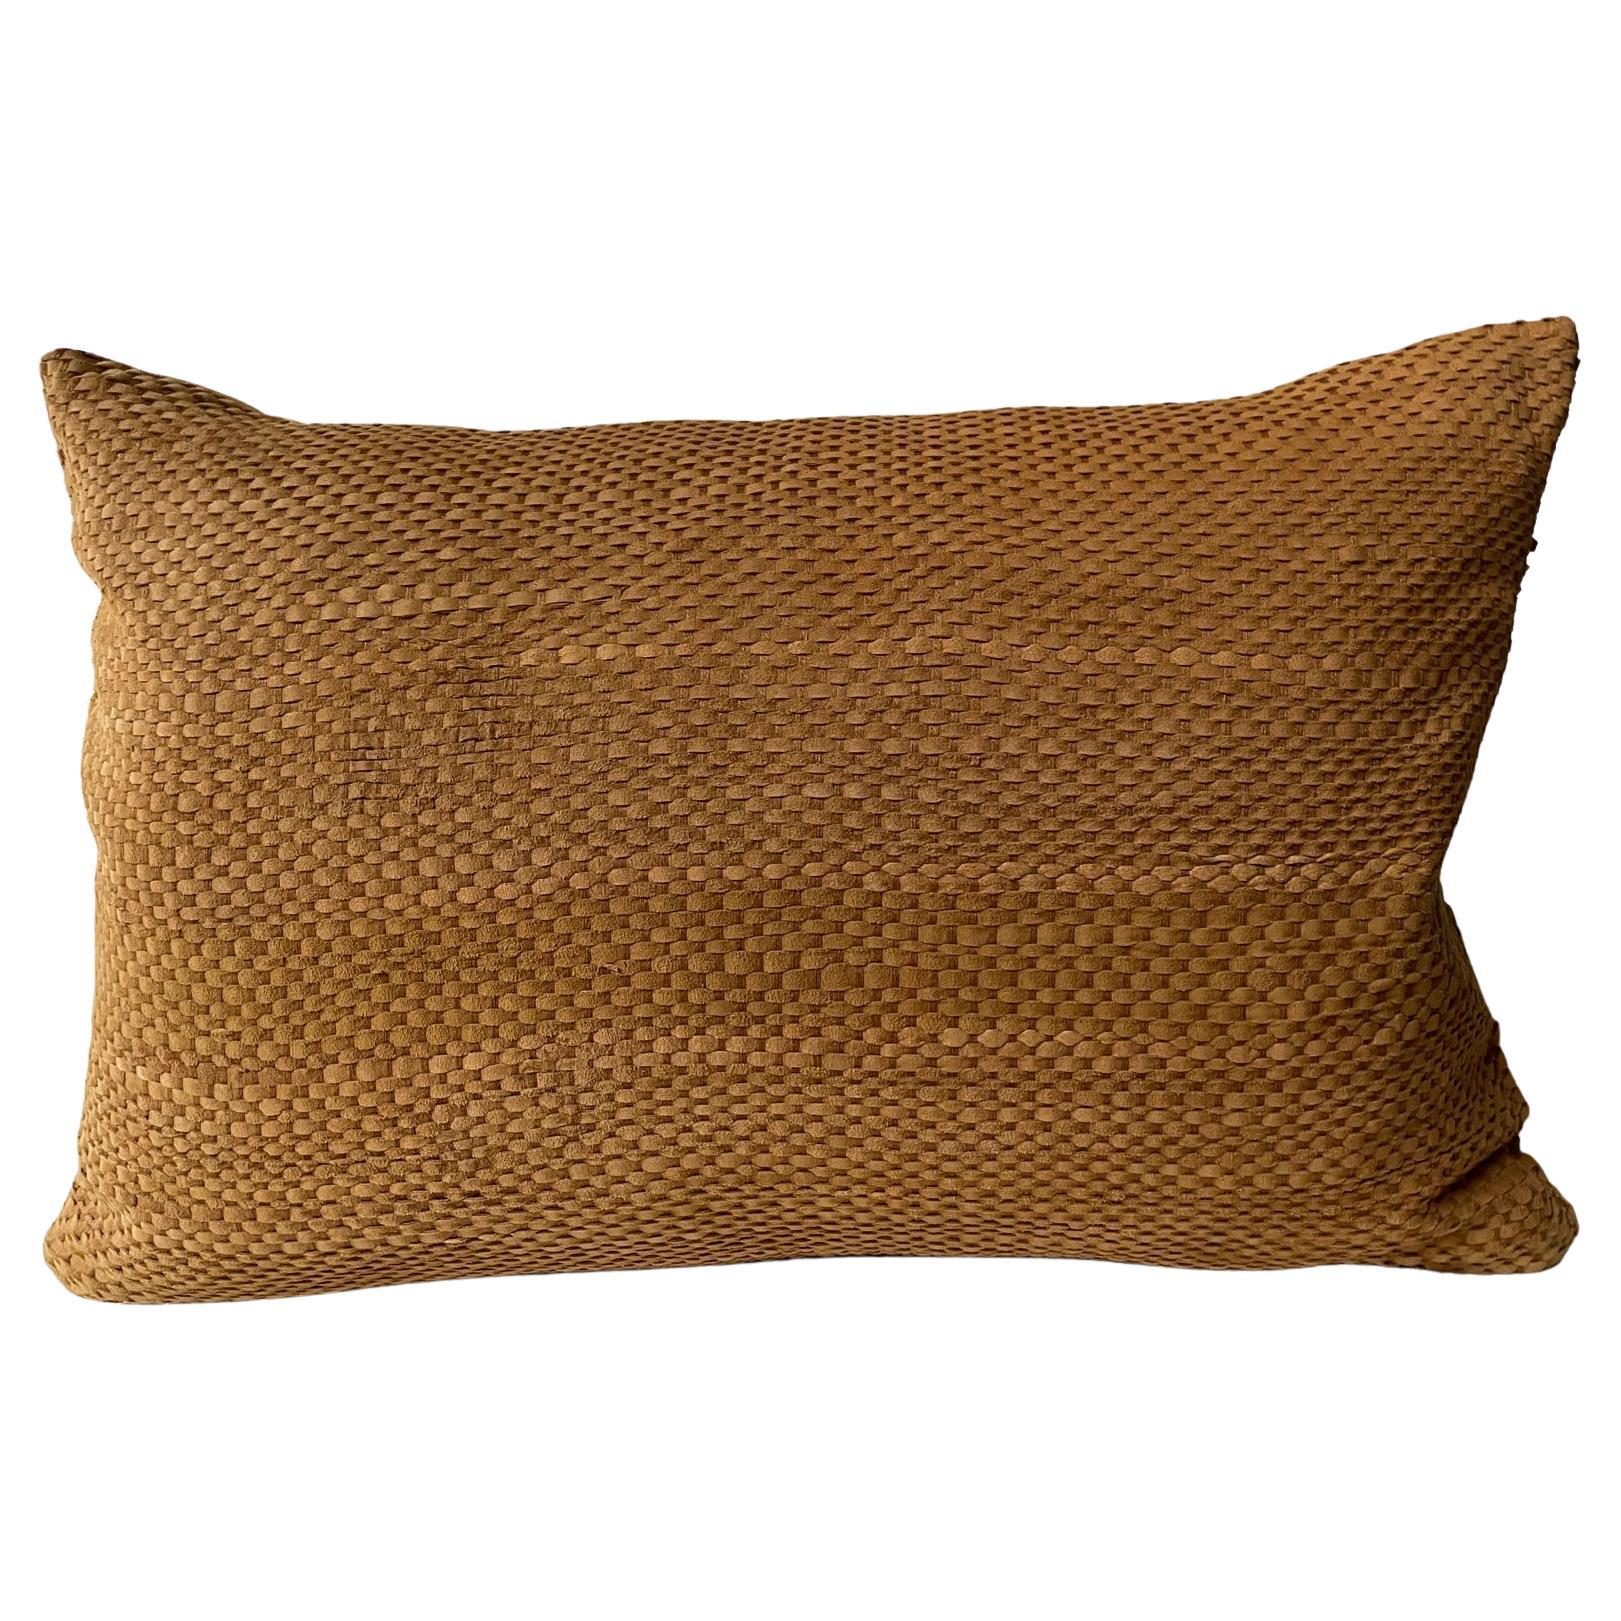 Hand Woven Suede Cushion Colour GInger Oblong Shaped For Sale